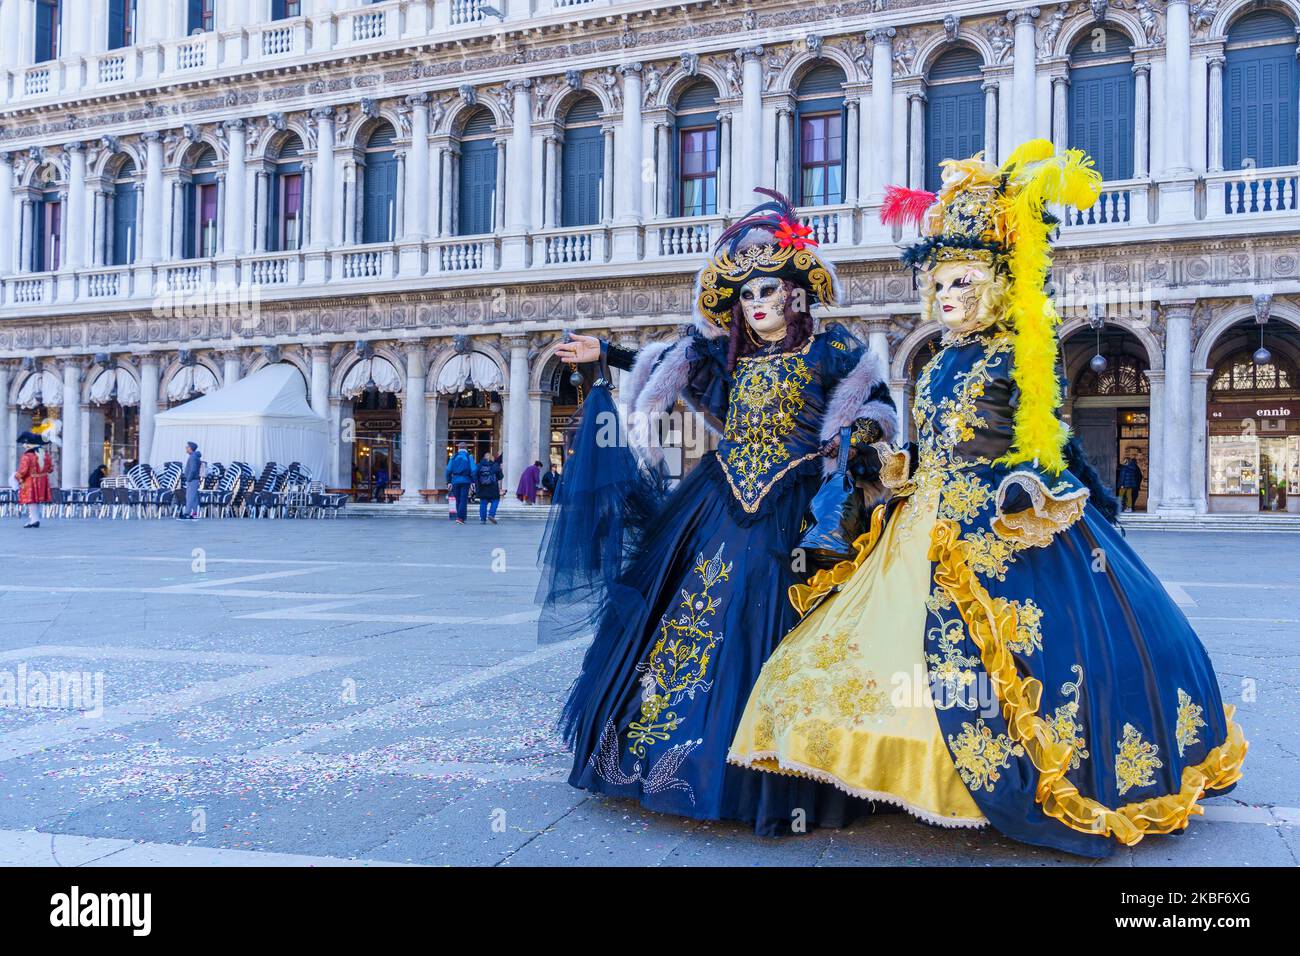 Venice, Italy - March 01, 2022: Couple dressed in traditional costumes stand in front of the Ducal palace, part of the Venice Mask Carnival, Veneto, I Stock Photo